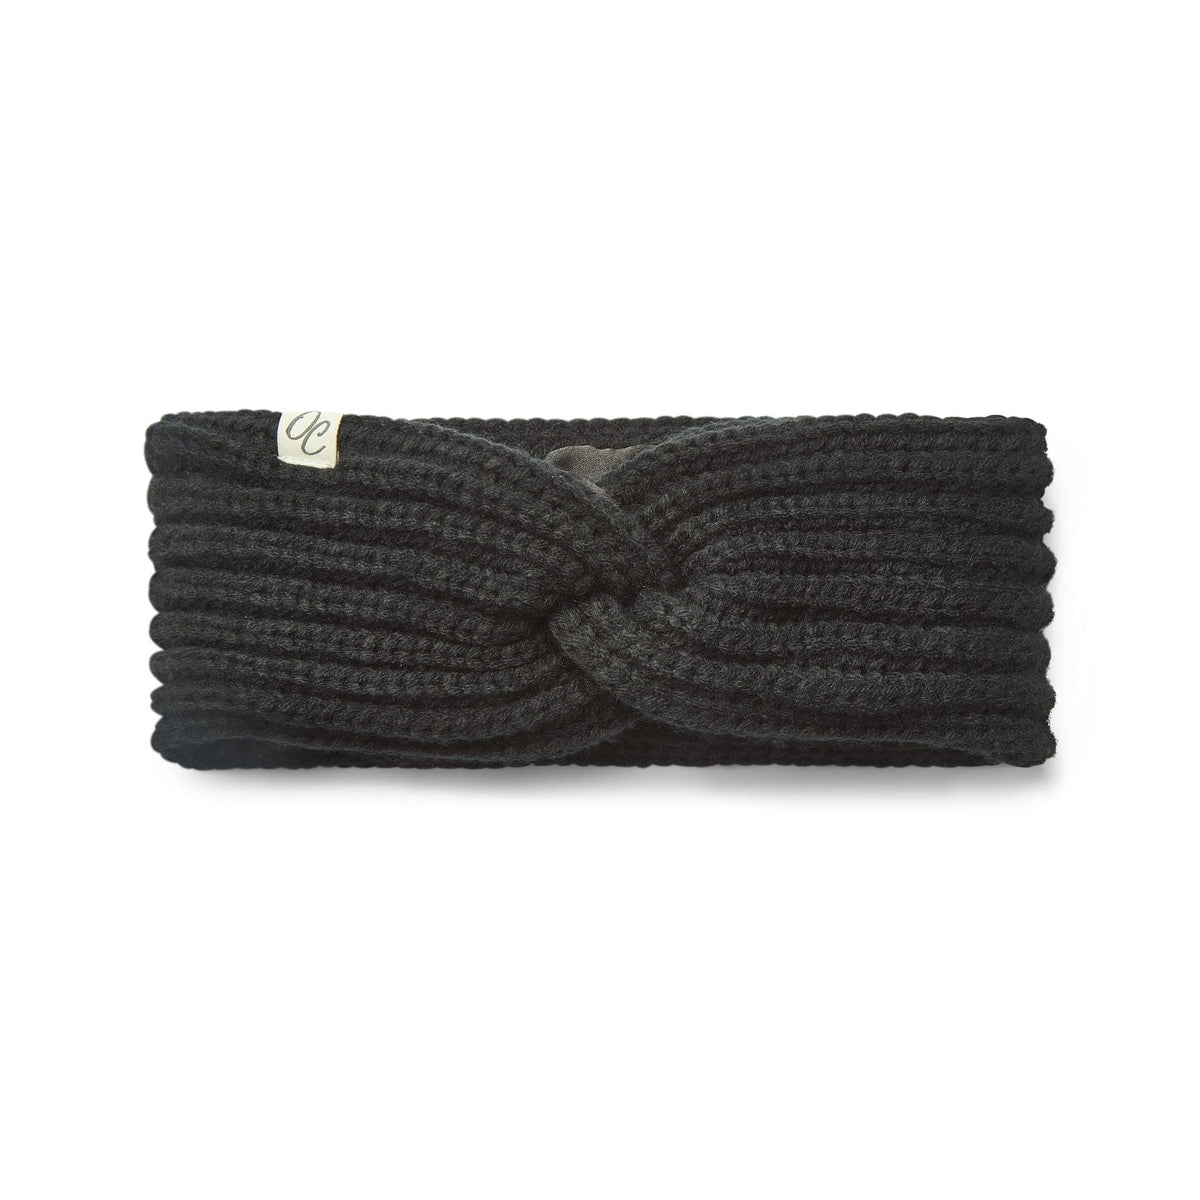 Only Curls Satin Lined Knitted Headband - Black - Only Curls